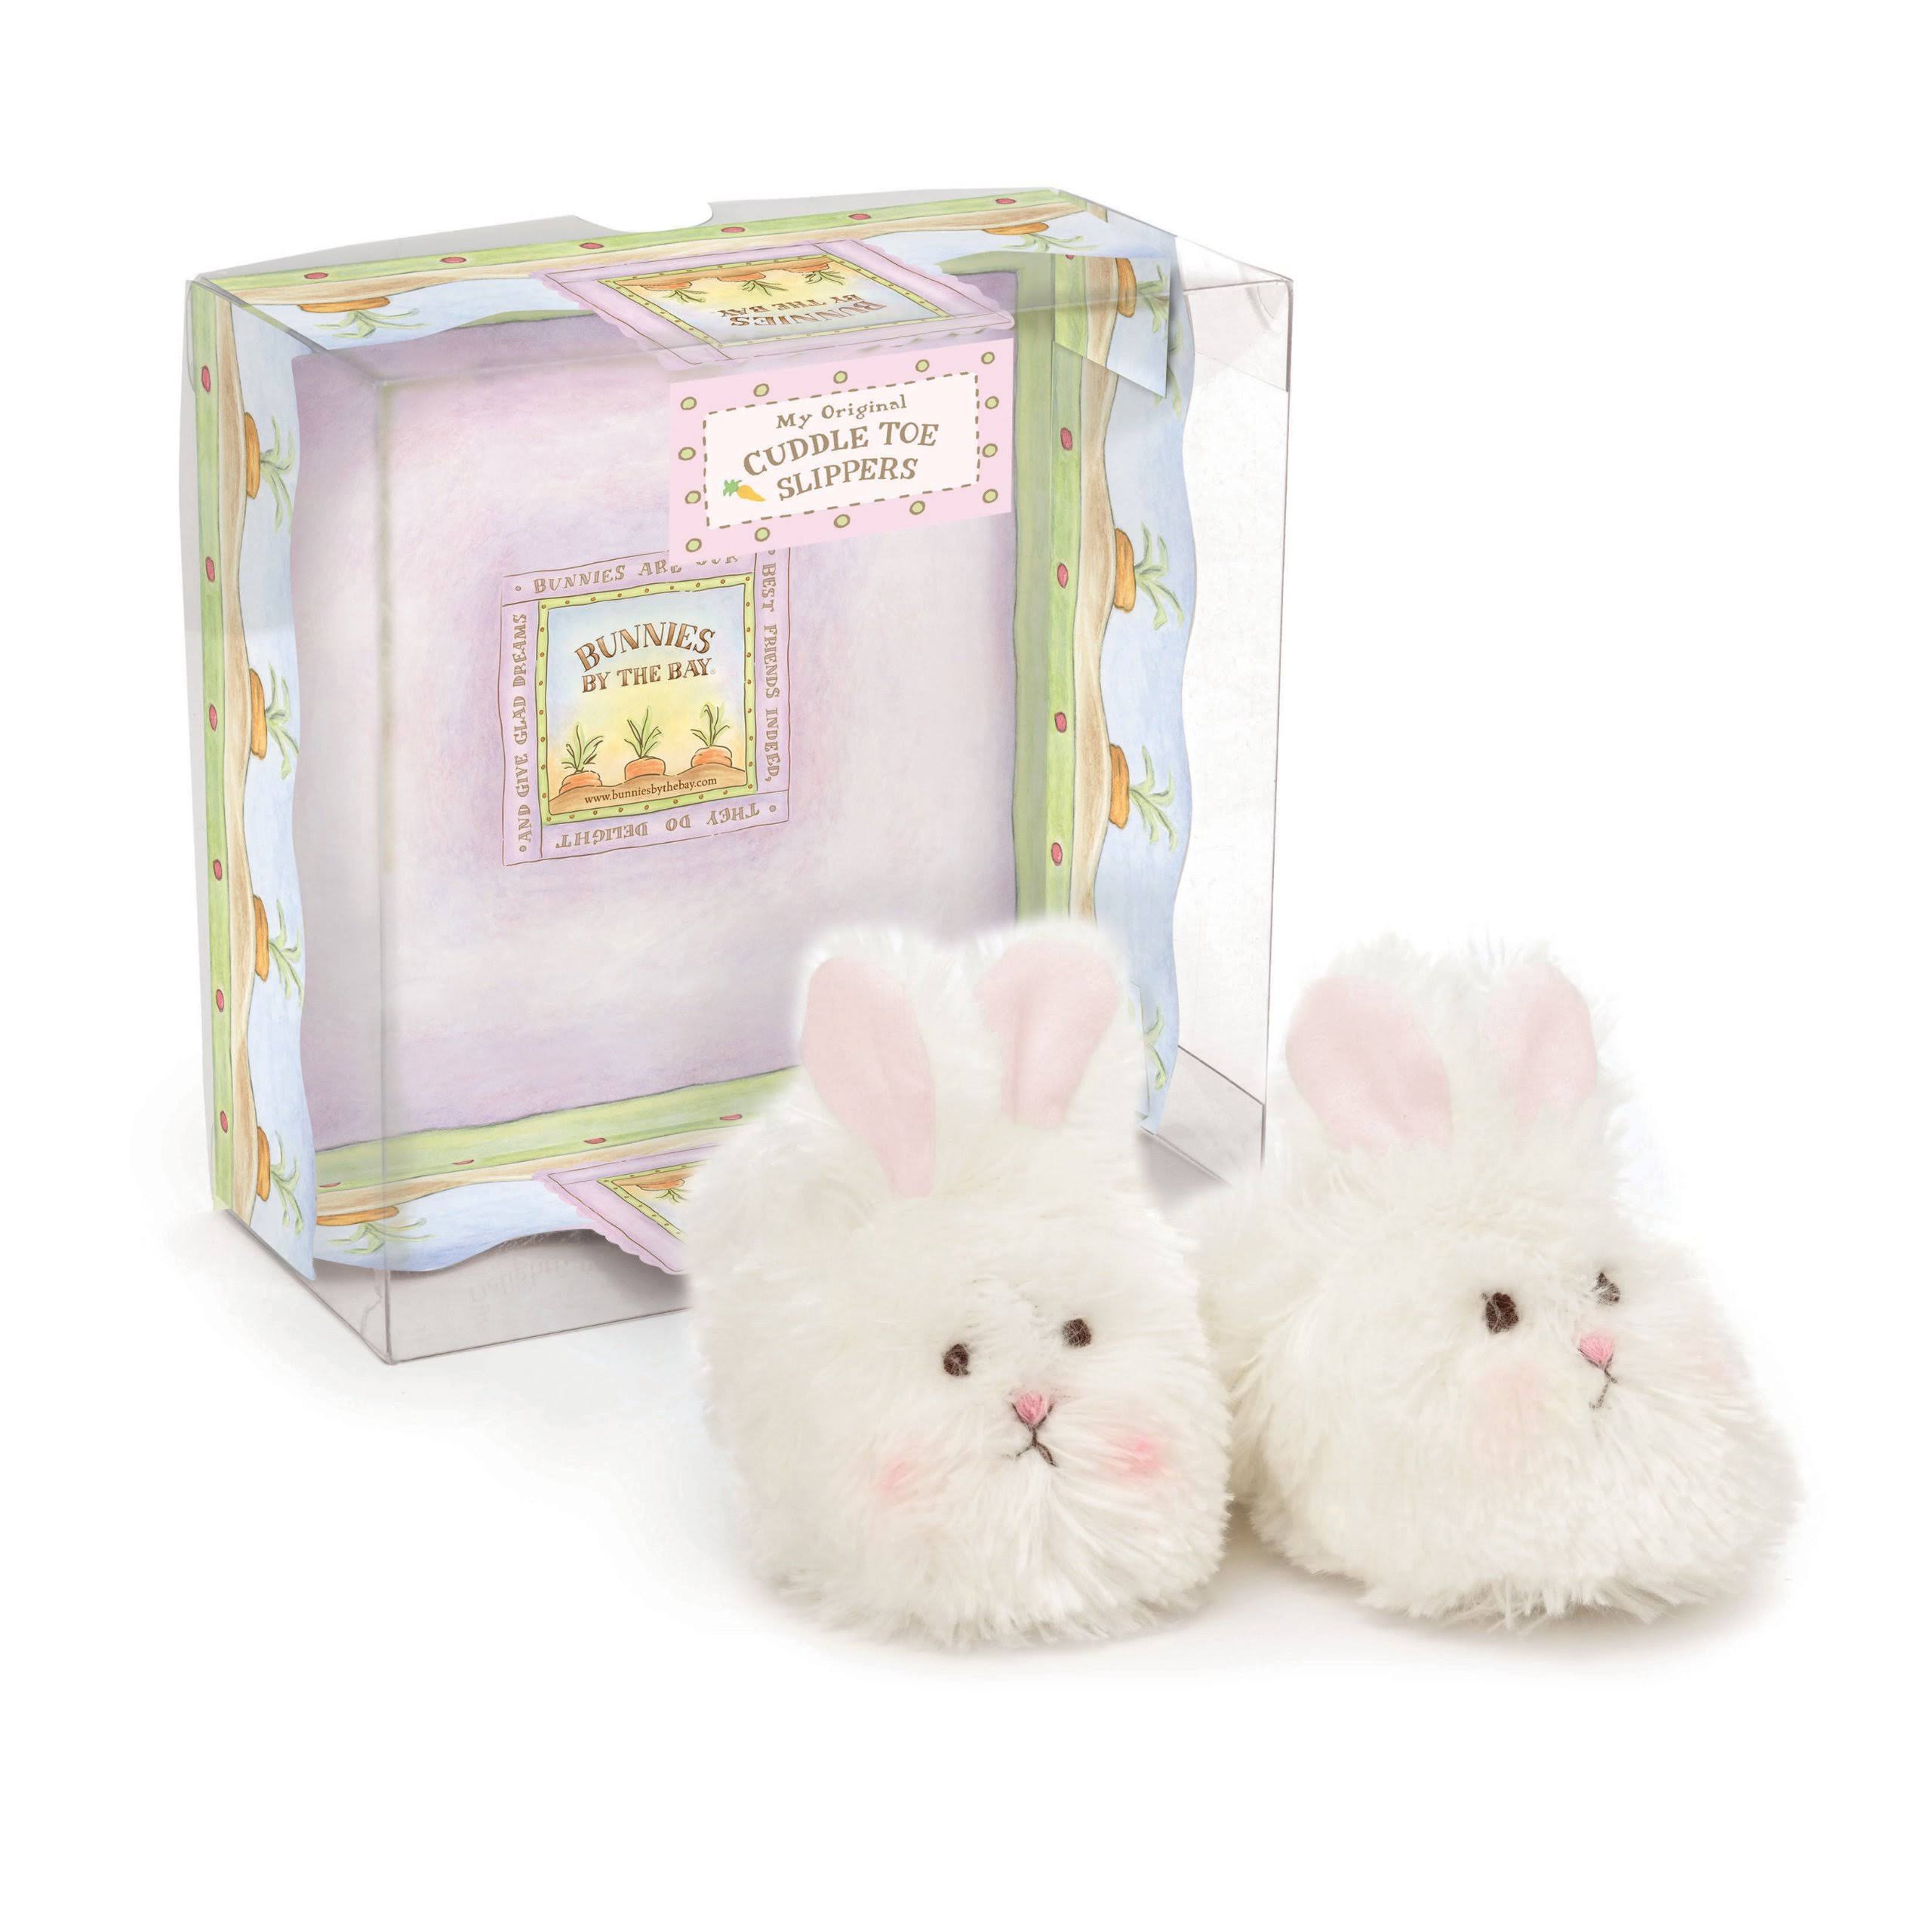 Bunnies by the Bay Bunny Cuddle Toe Slippers - White, 6 to 12 Months